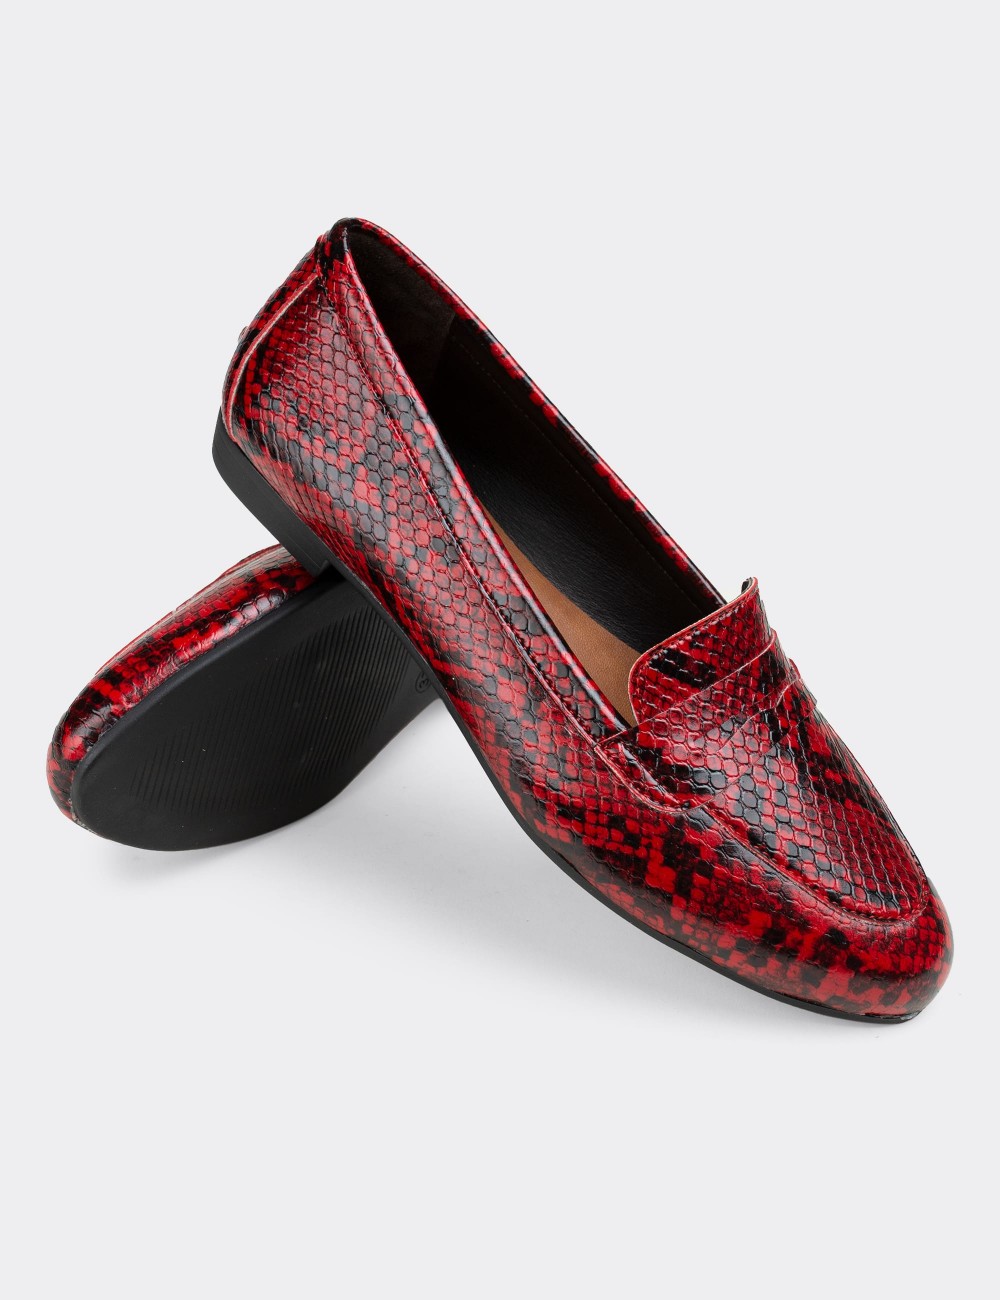 Red Loafers - E3202ZKRMC02